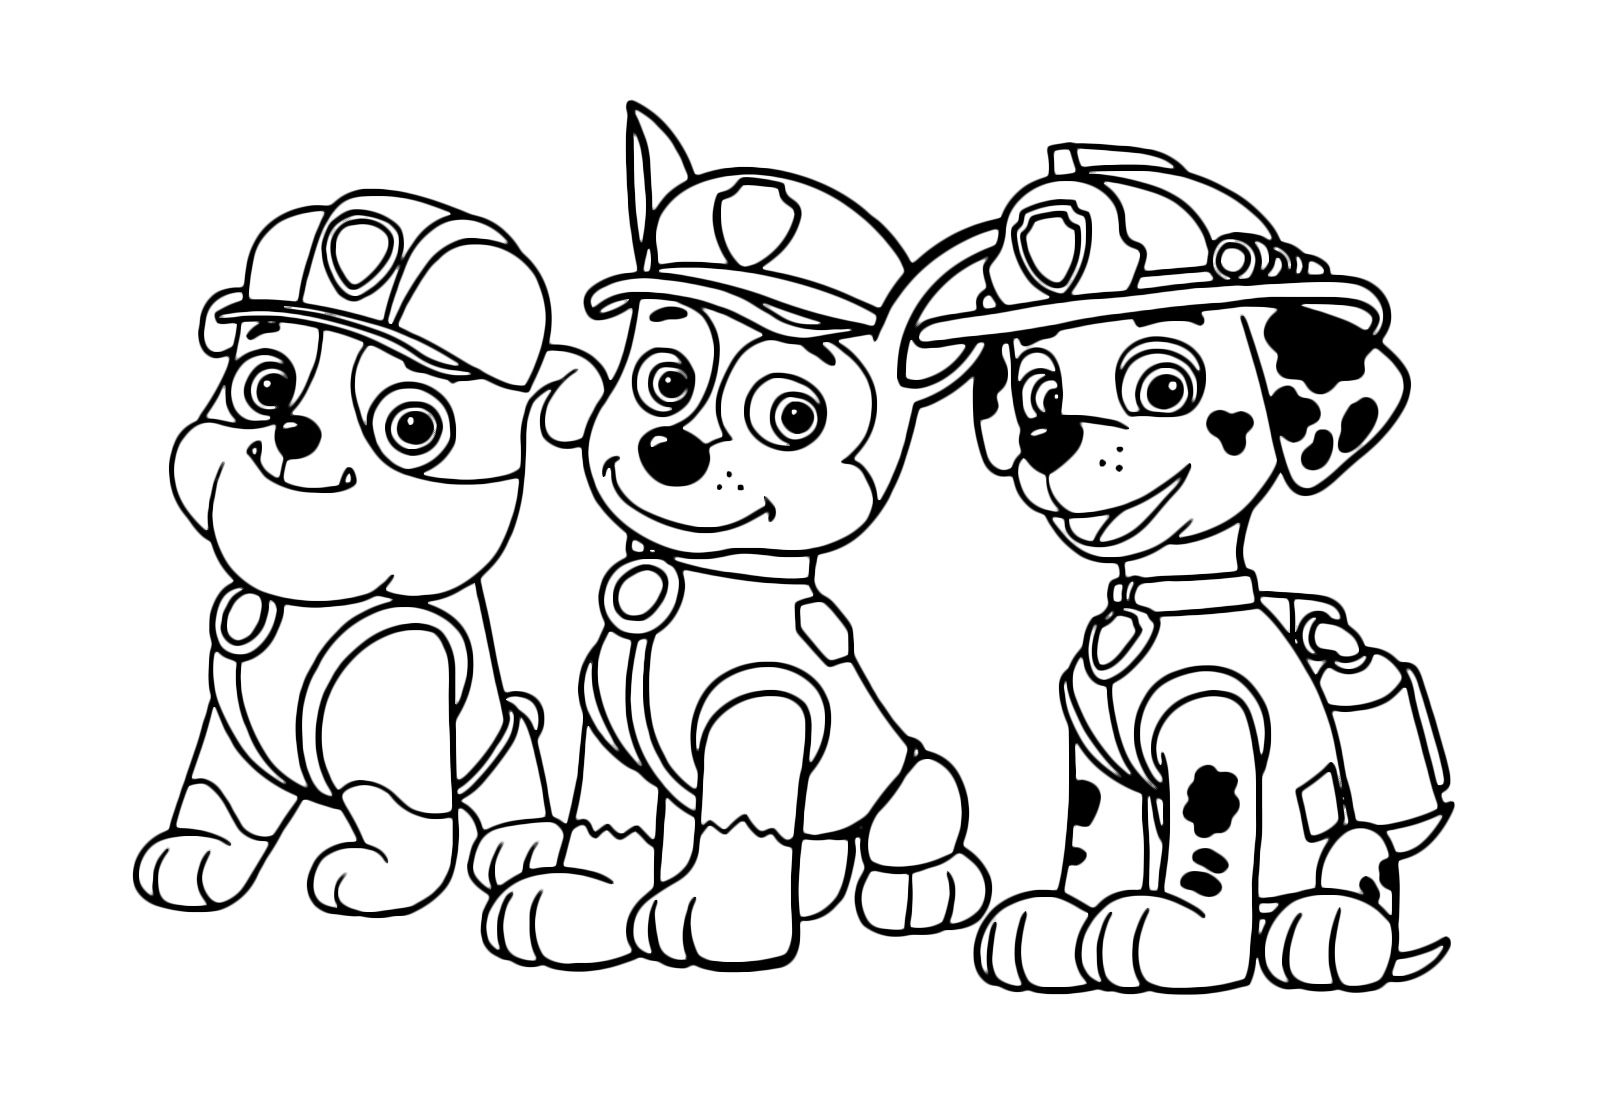 PAW Patrol - Rubble Chase and Marshall three important members of the Paw  Patrol